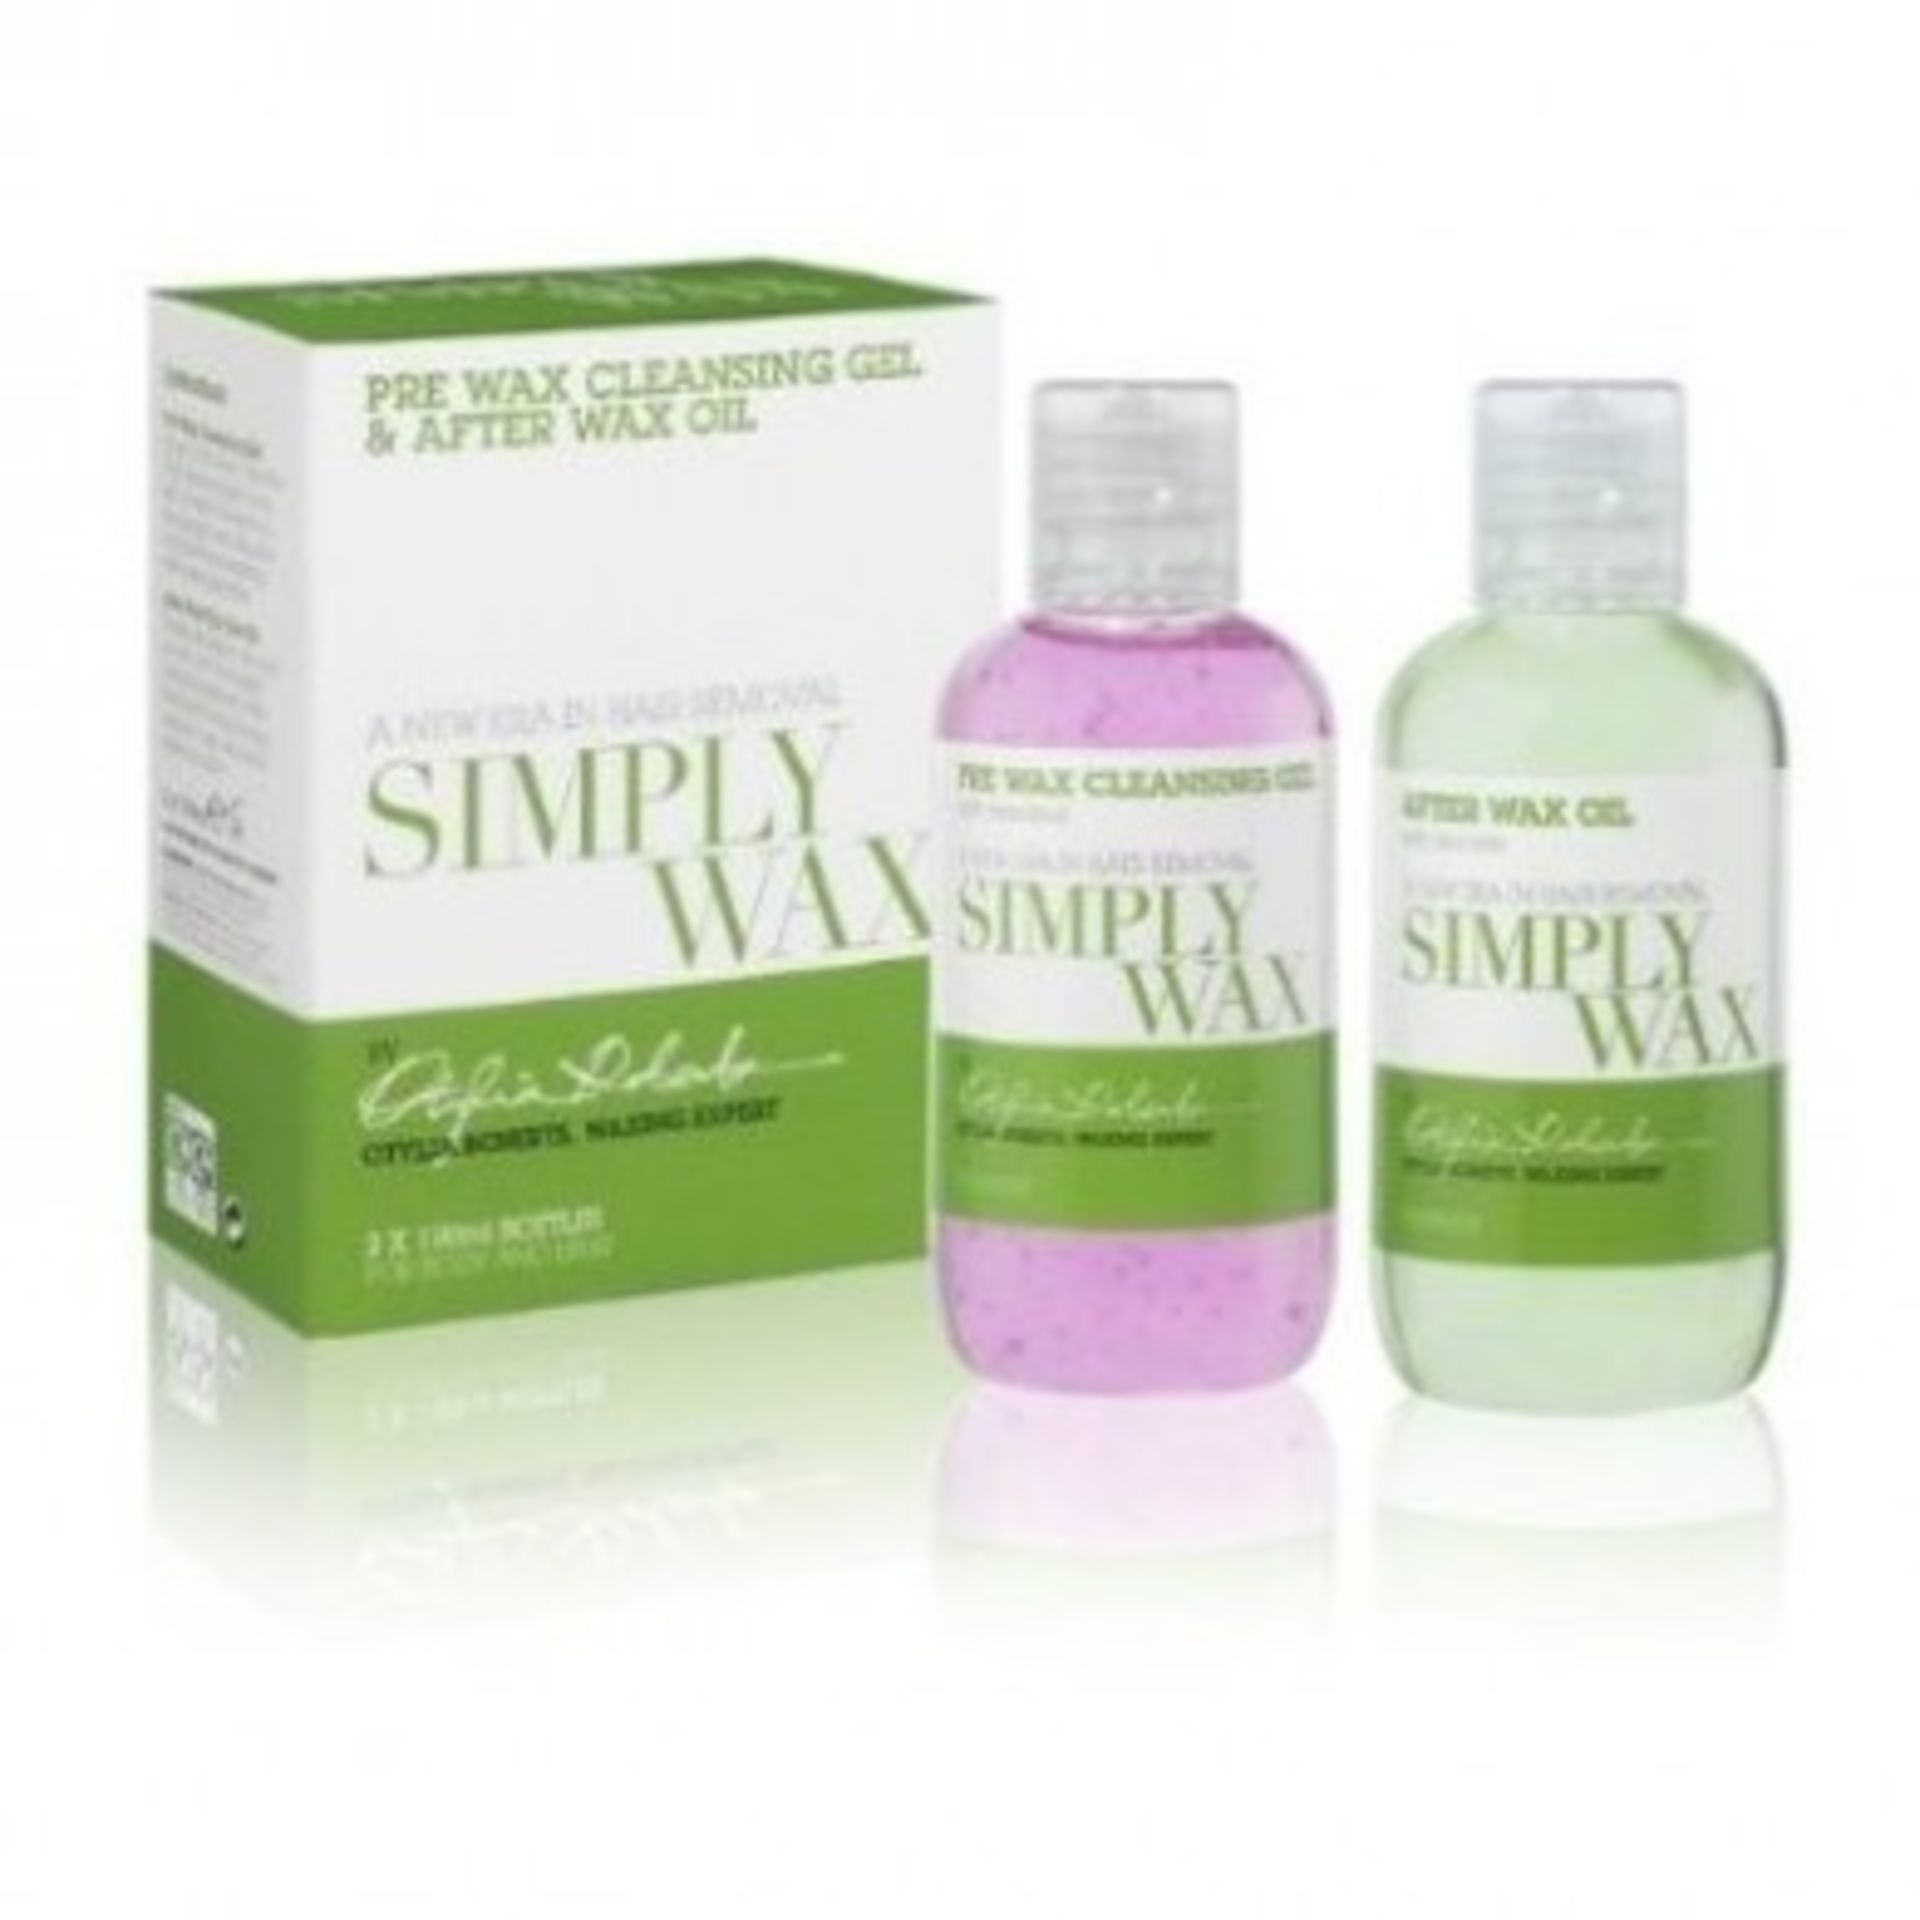 100 x Simply Wax Sets – Pre cleansing gel and after wax oil – 2 x 100ml per set – NO VAT – UK